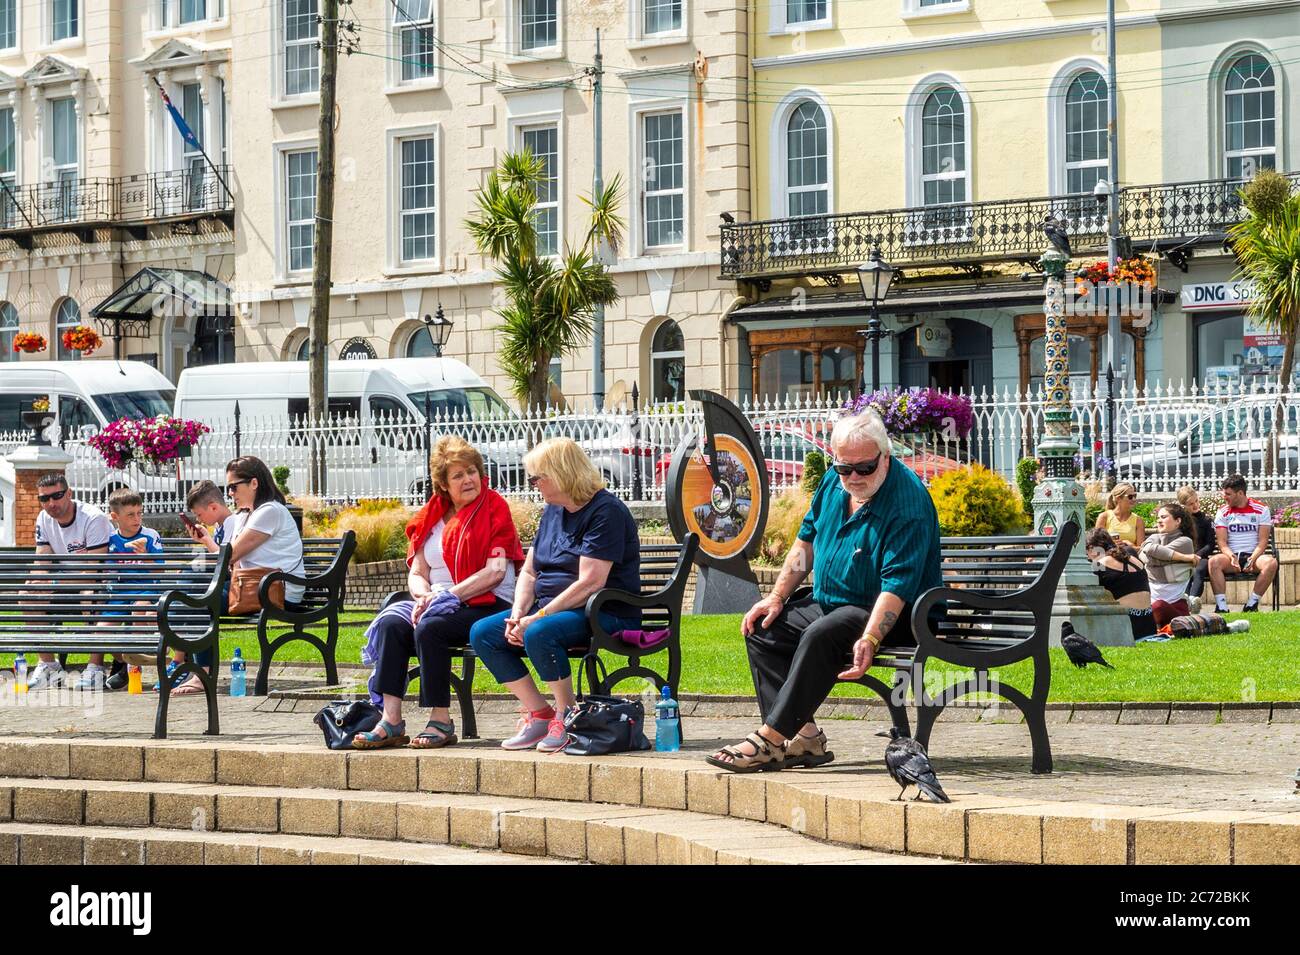 Cobh, County Cork, Ireland. 13th July, 2020. On an overcast but humid day, people enjoy the President John F. Kennedy Memorial Park on the sea front in Cobh. Credit: AG News/Alamy Live News Stock Photo